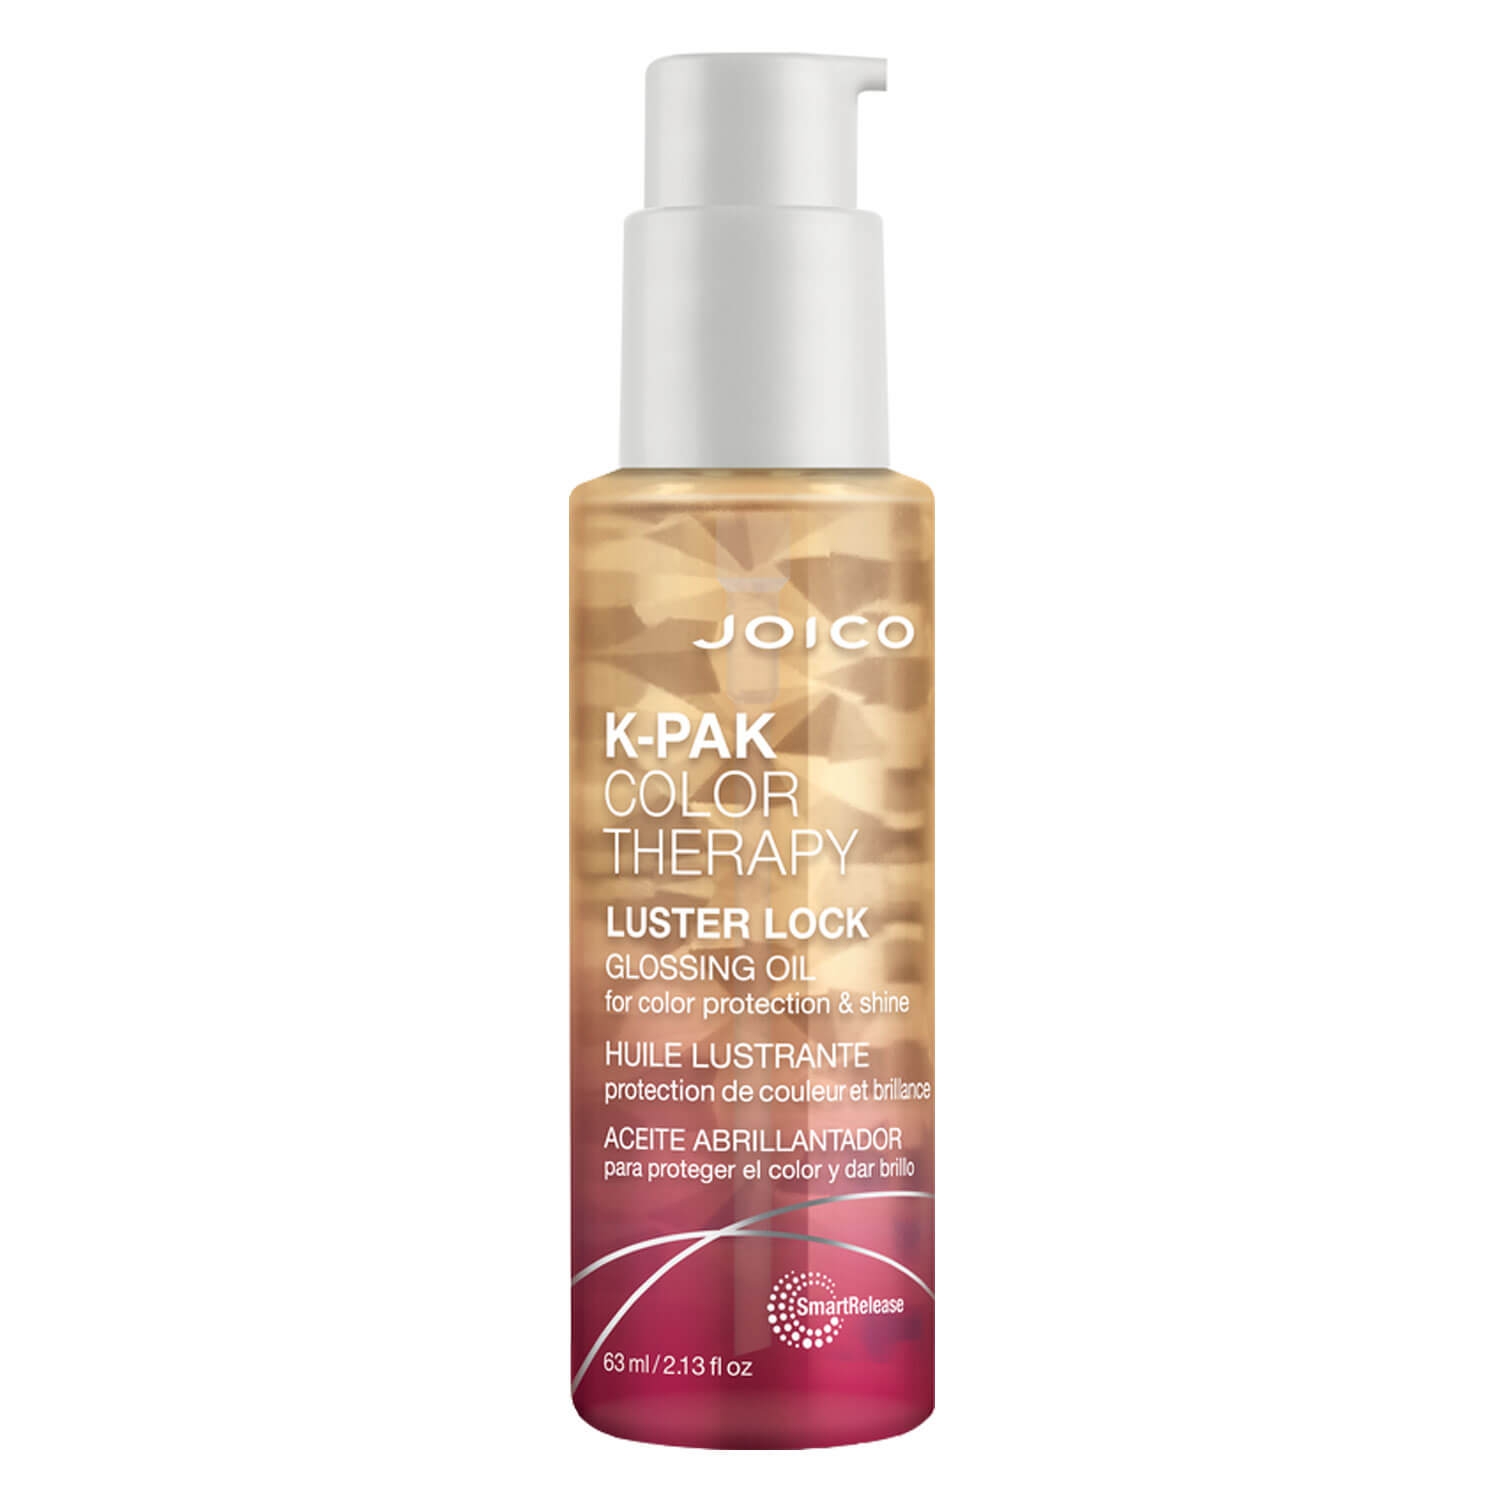 Product image from K-Pak - Color Therapy Luster Lock Glossing Oil